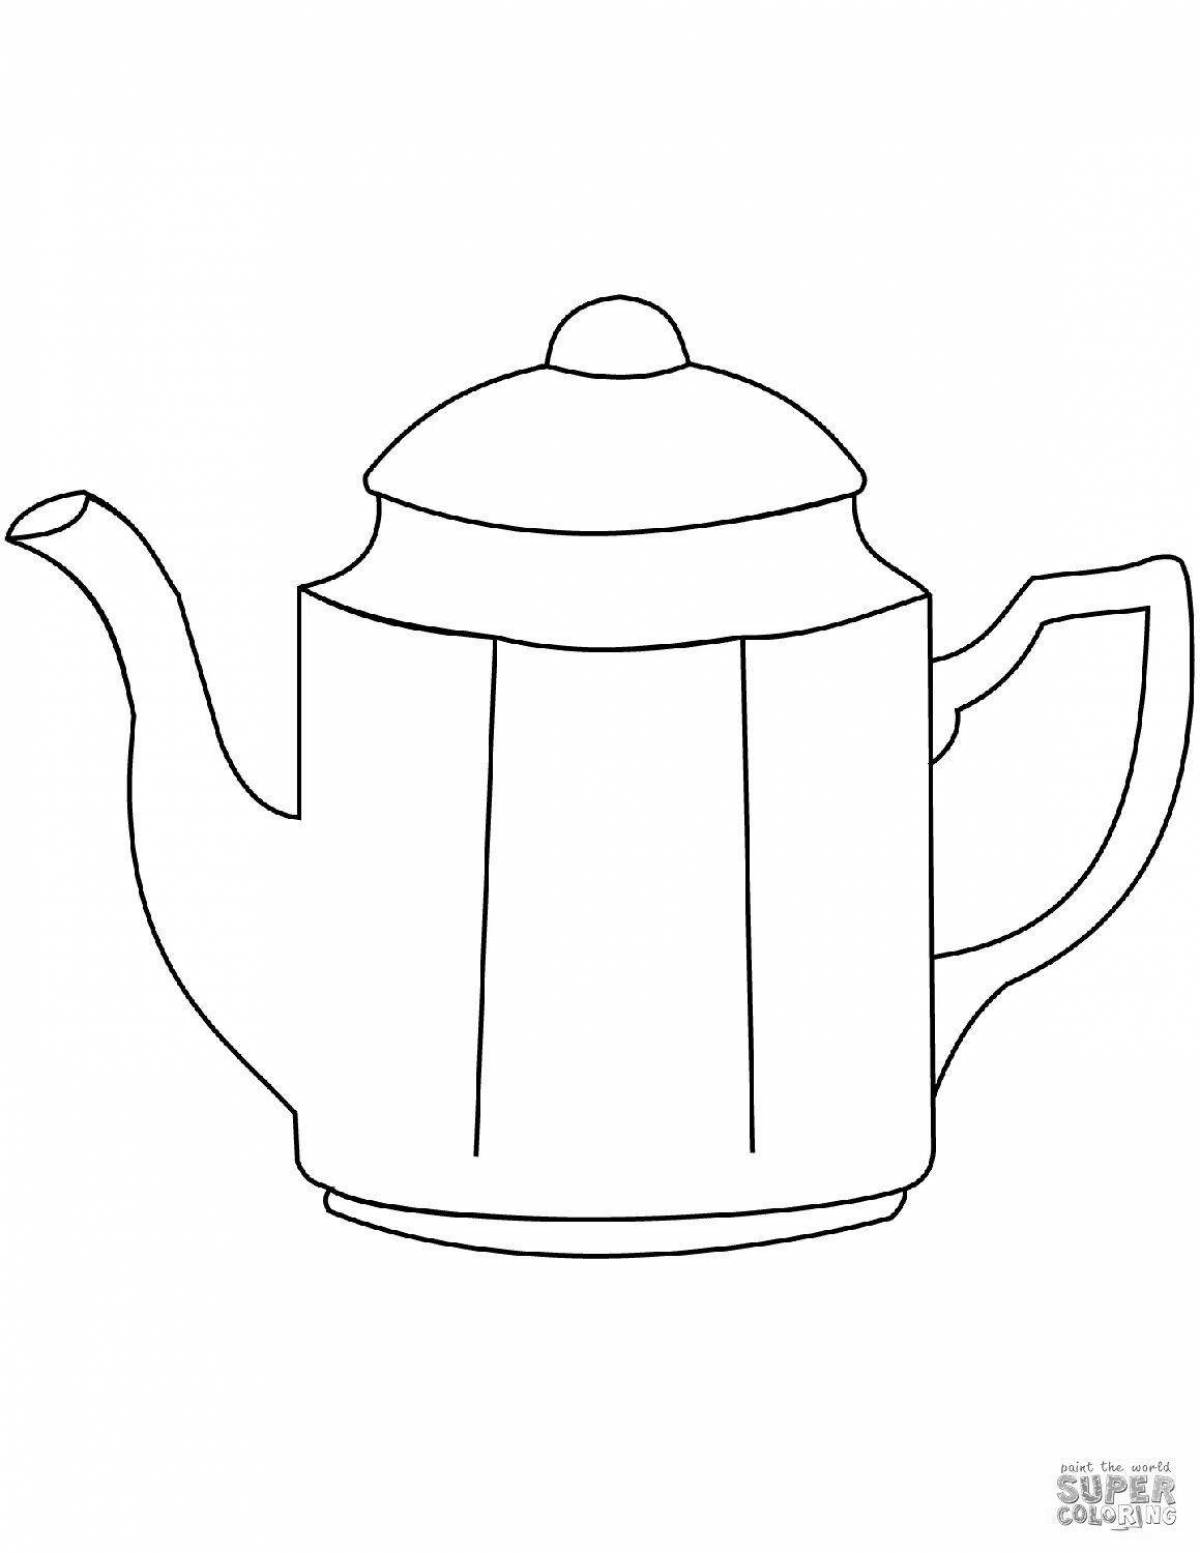 Gorgeous teapot coloring page for 3-4 year olds